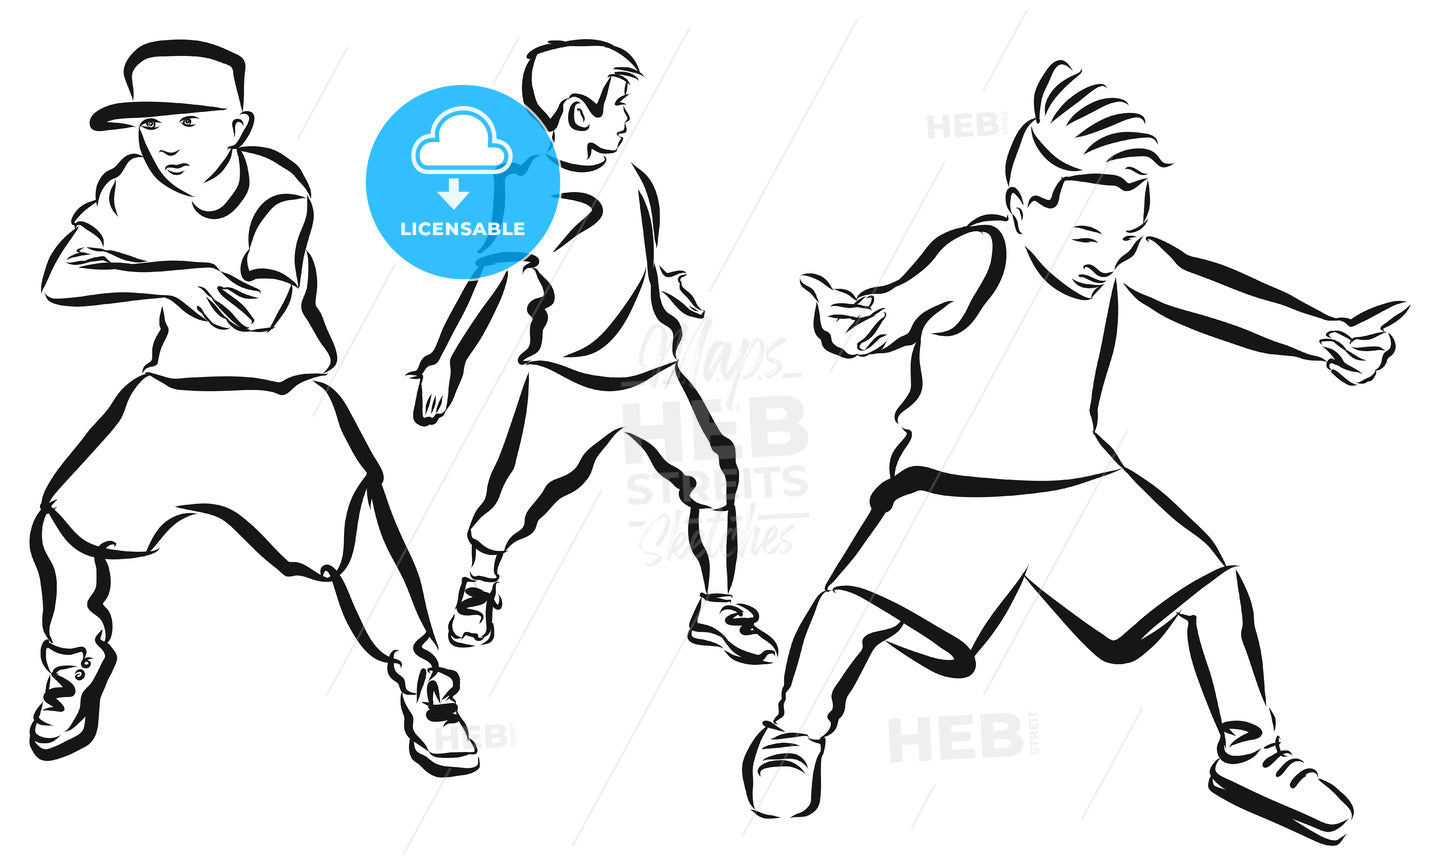 Three Boys, coloring Page, Hip Hop Choreography – instant download